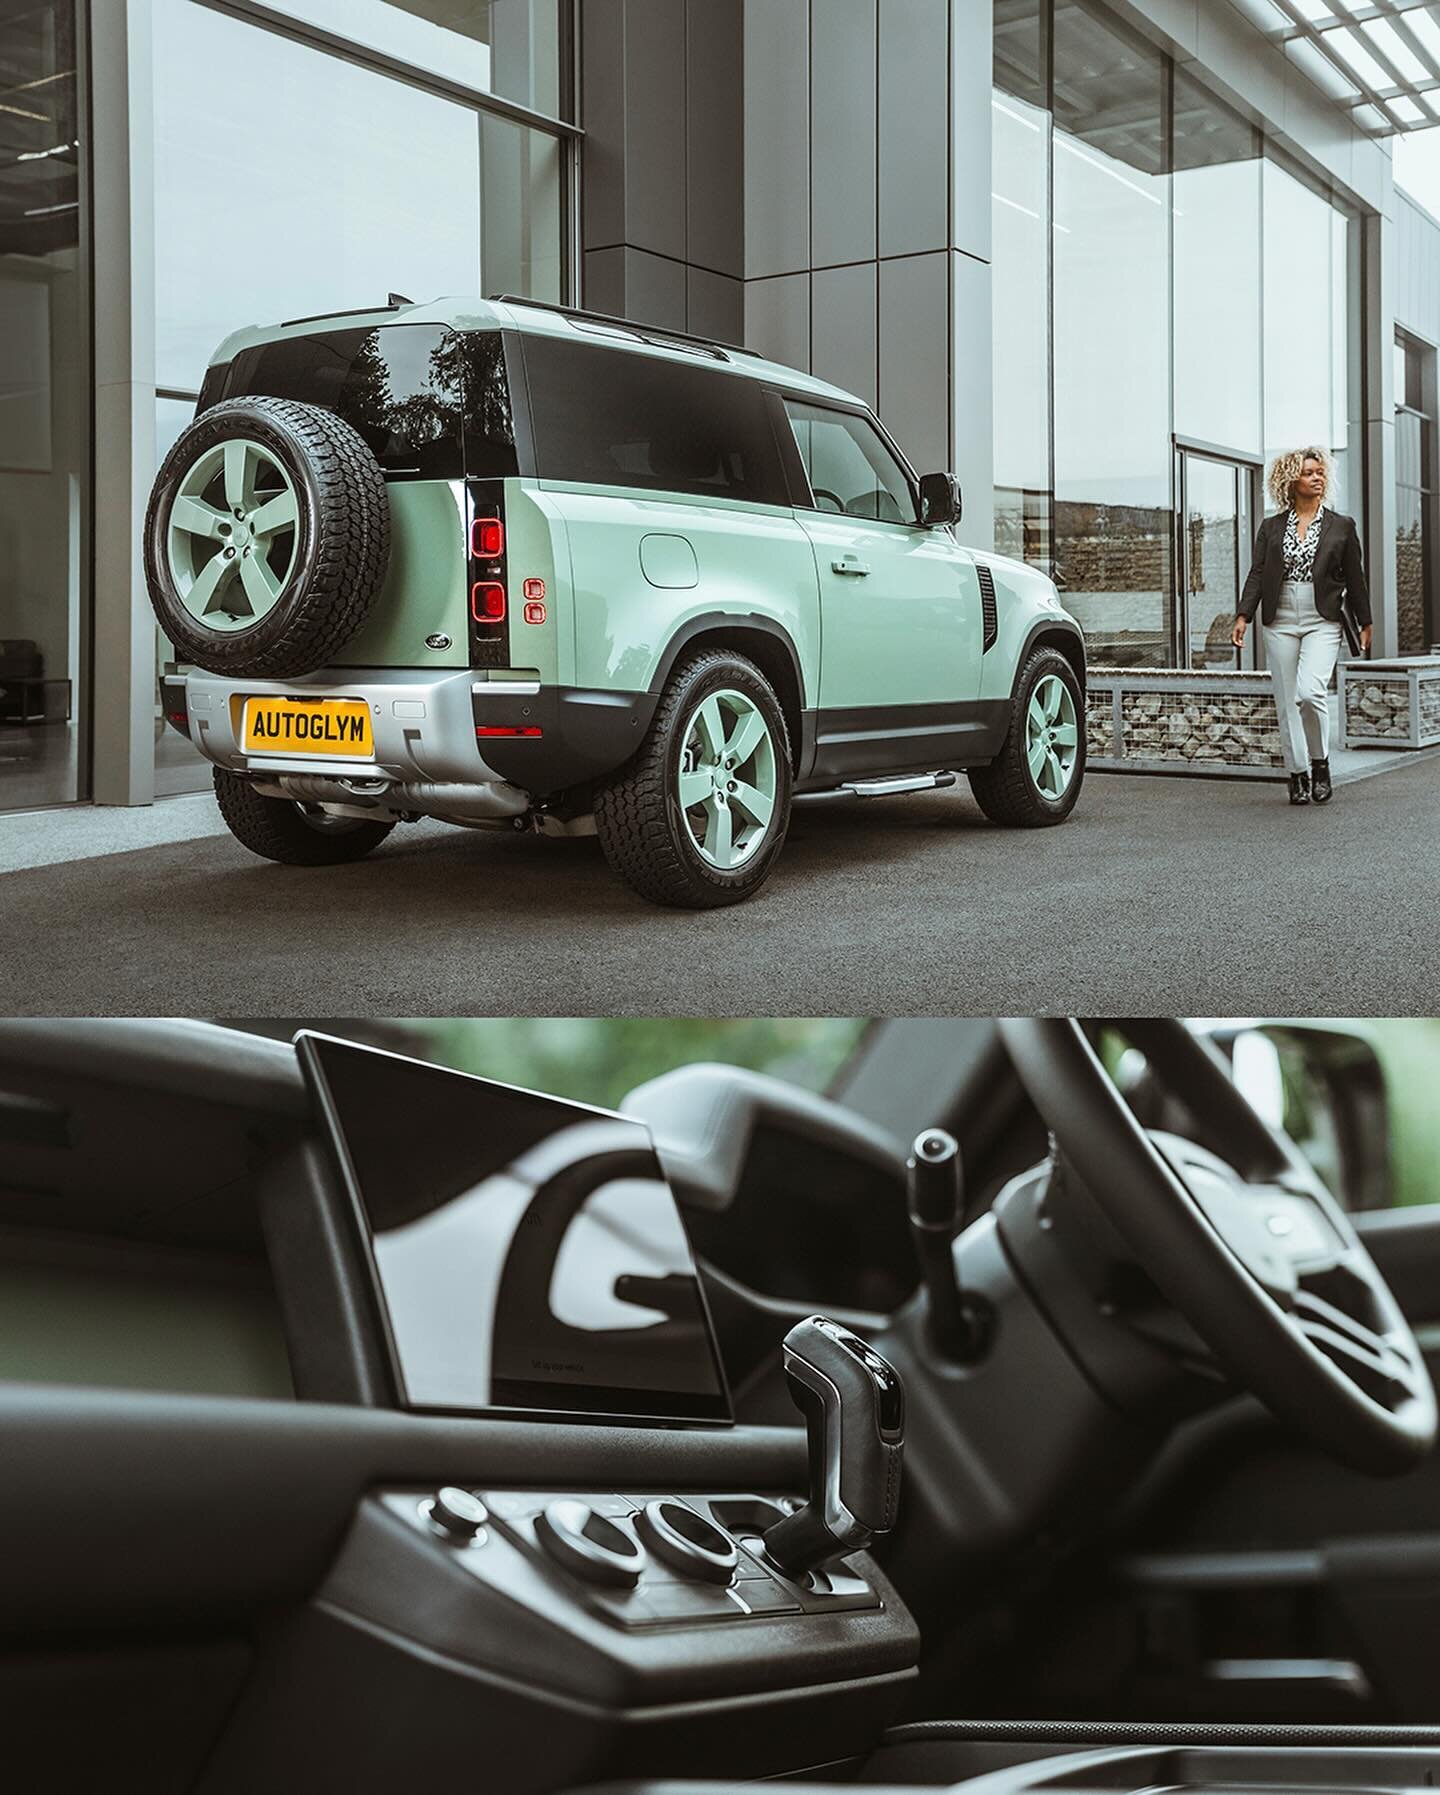 New work for @autoglymuk 

Happy to share a few favourites from this shoot last autumn, capturing lifestyle images at several locations with 3 cars, 4 models, in one day.

Production - @anythinginstapossible